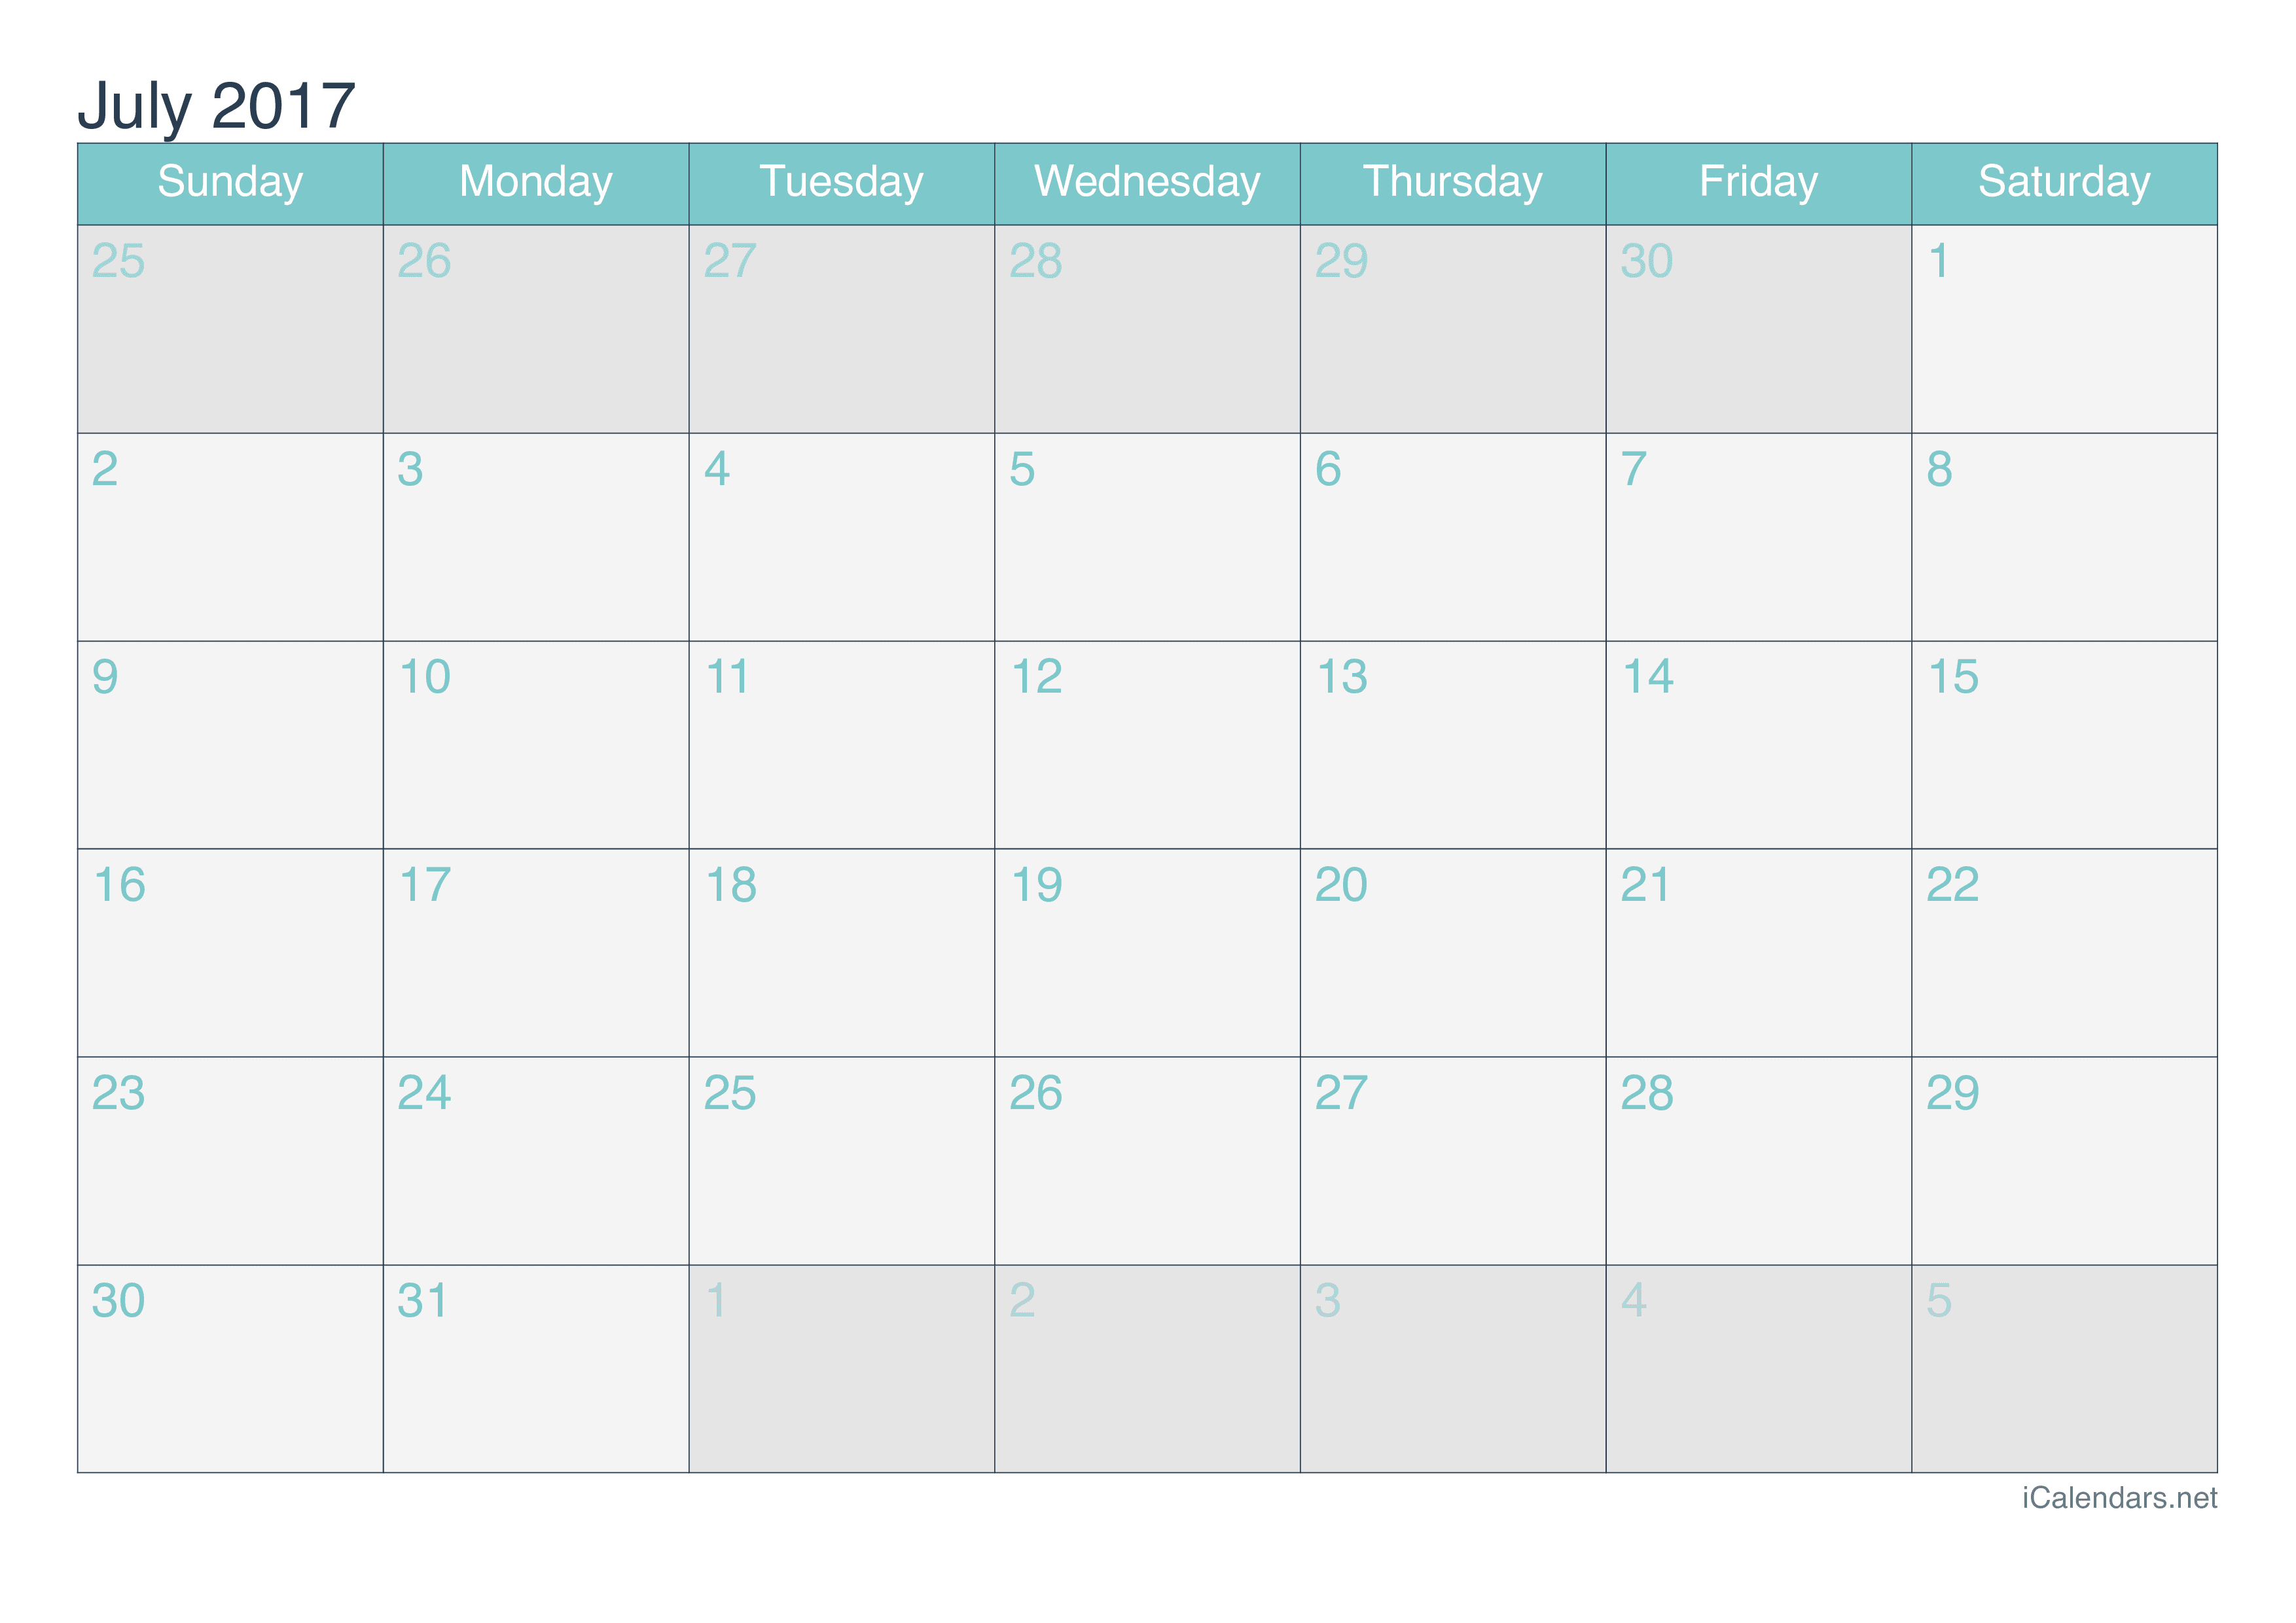 july-2017-calendar-template-royalty-free-vector-image